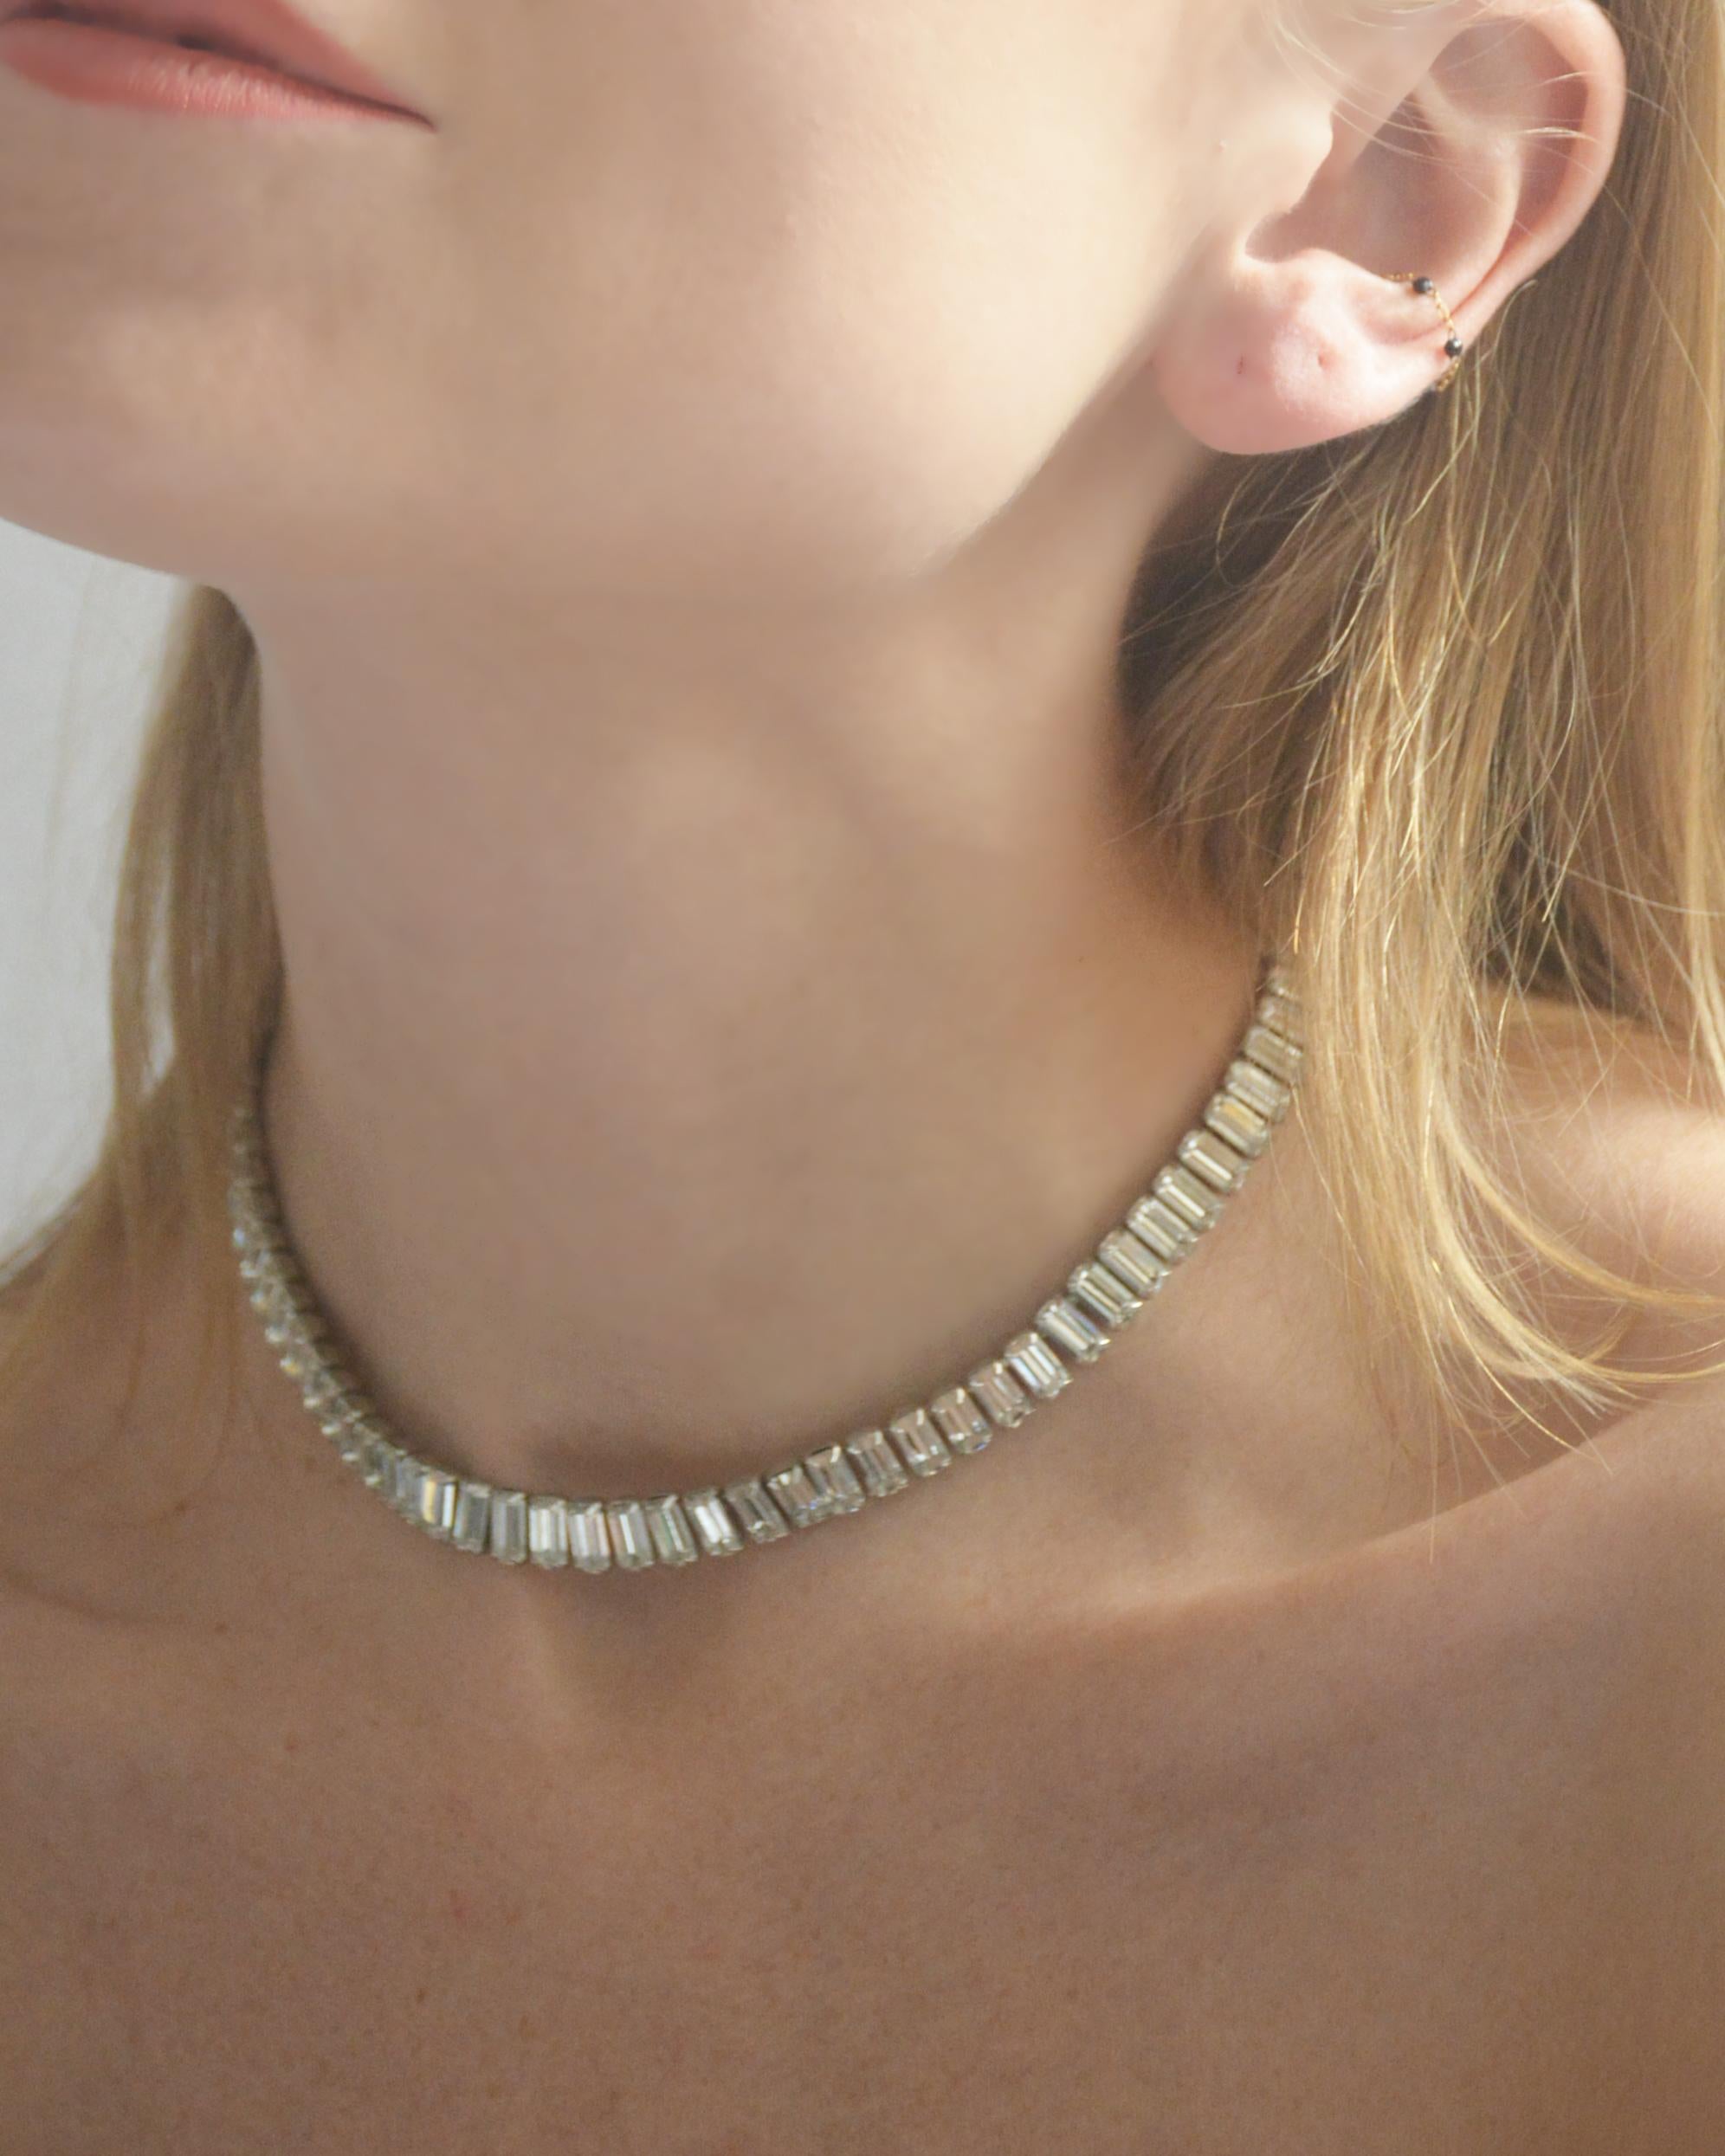 Made in the 1950s by Weiss, this diamanté  baguette choker is a serious show-stopper. Weiss is known for their high quality costume jewelry from this era, crafted with handmade construction techniques which today are reserved for fine jewelry—